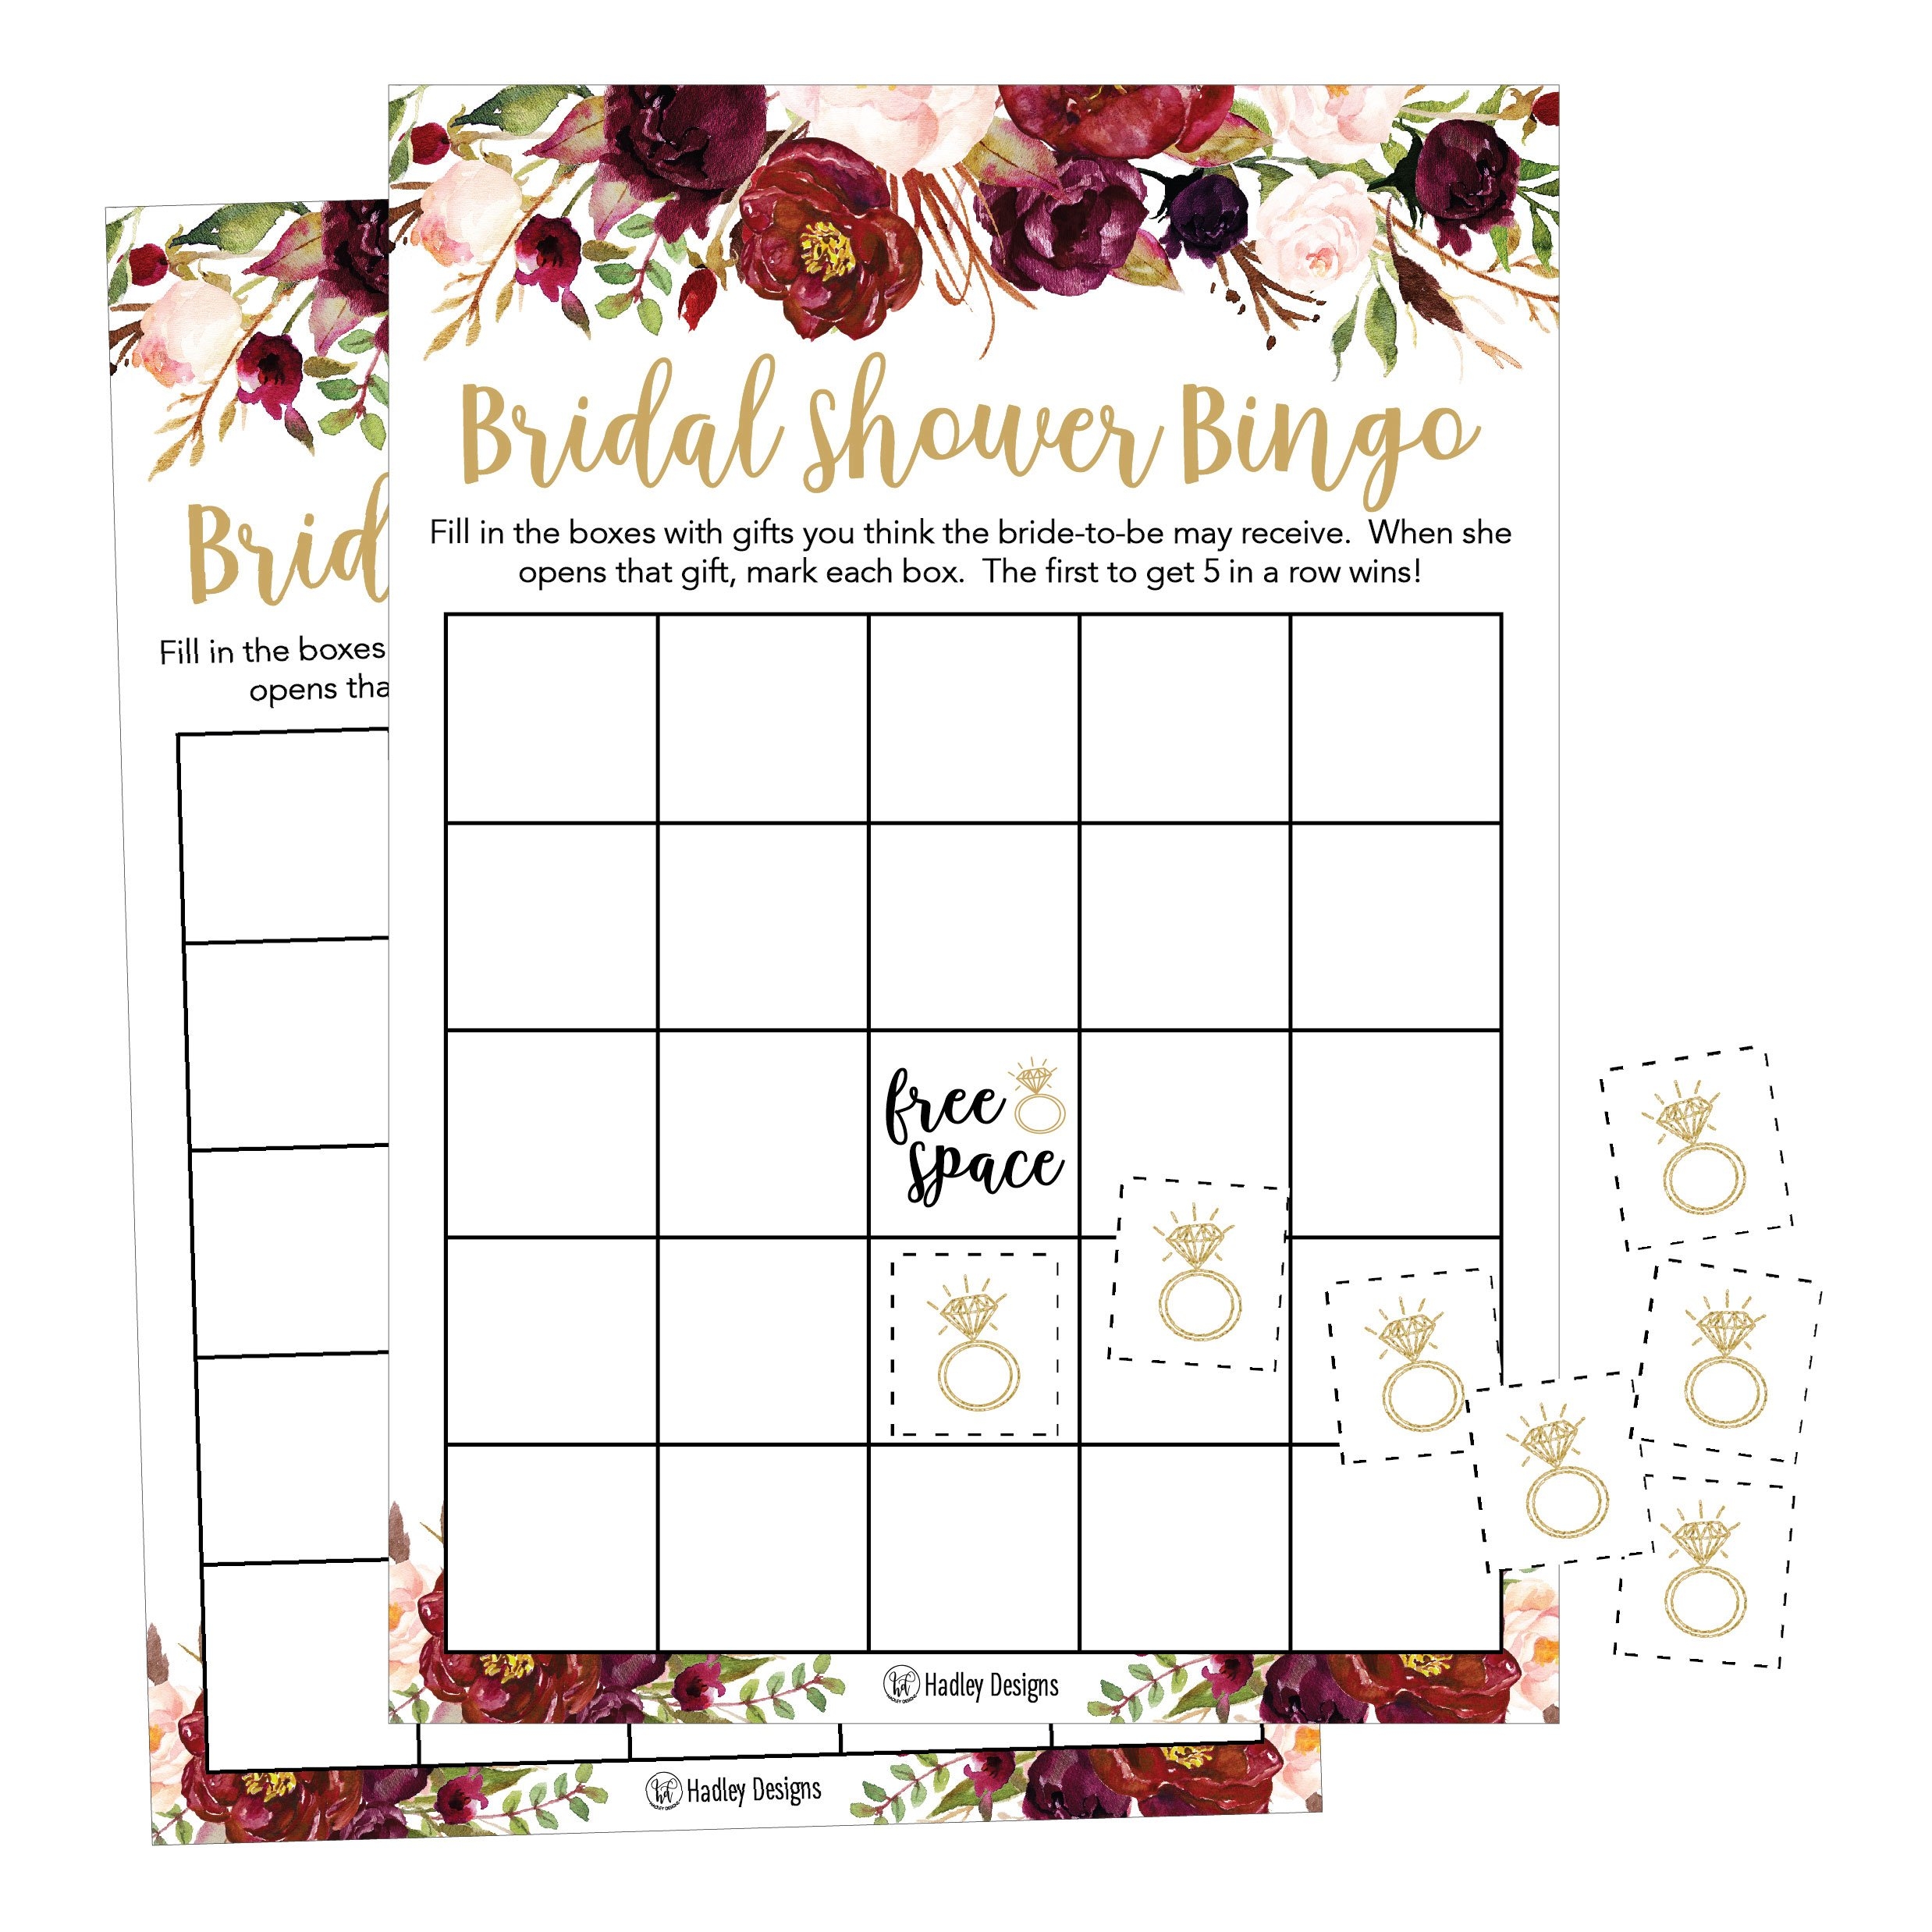 Amazon 25 Pink Flower Bingo Game Cards For Bridal Wedding Shower And Bachelorette Party Bulk Blank Squares To Fill In Gift Ideas Funny Supplies For Bride And Couple PLUS 25 Wedding Ring - Free Printable Bridal Shower Blank Bingo Games